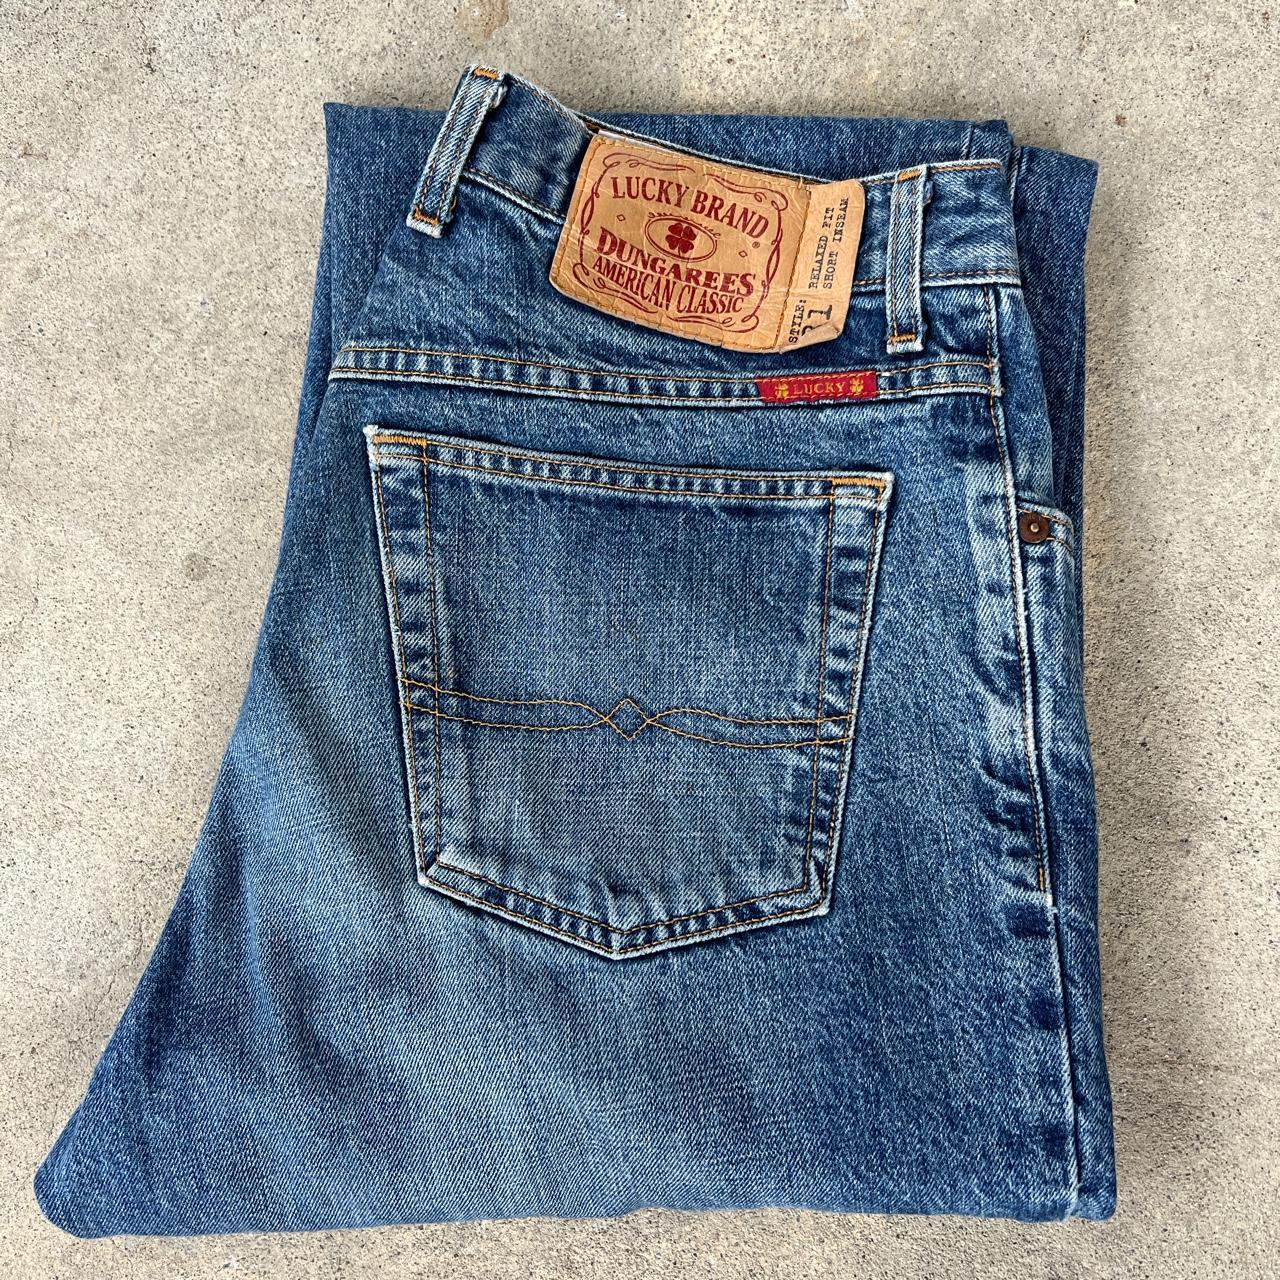 Vintage Men's Blue Denim Dungarees Jeans by LUCKY BRAND Dungarees